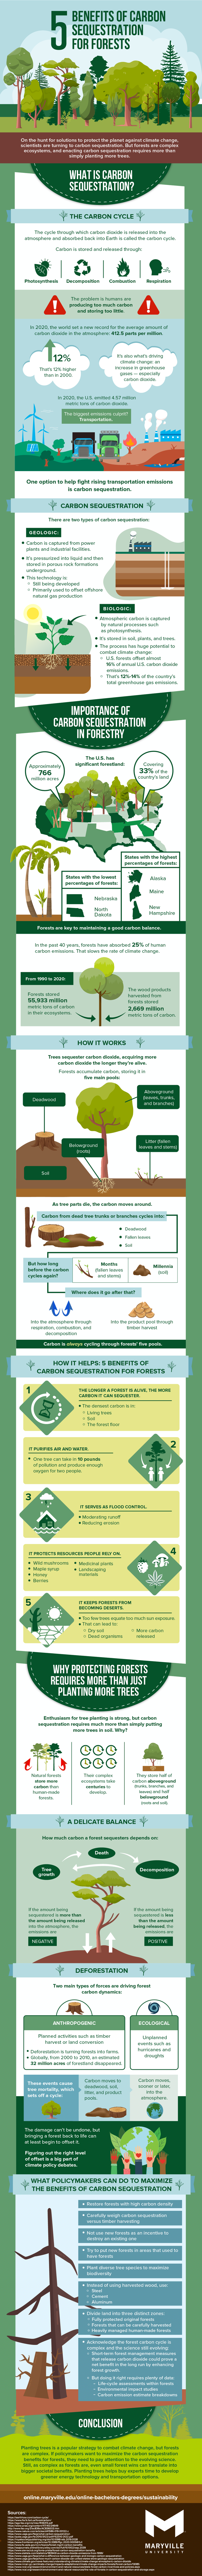 Benefits of carbon sequestration.